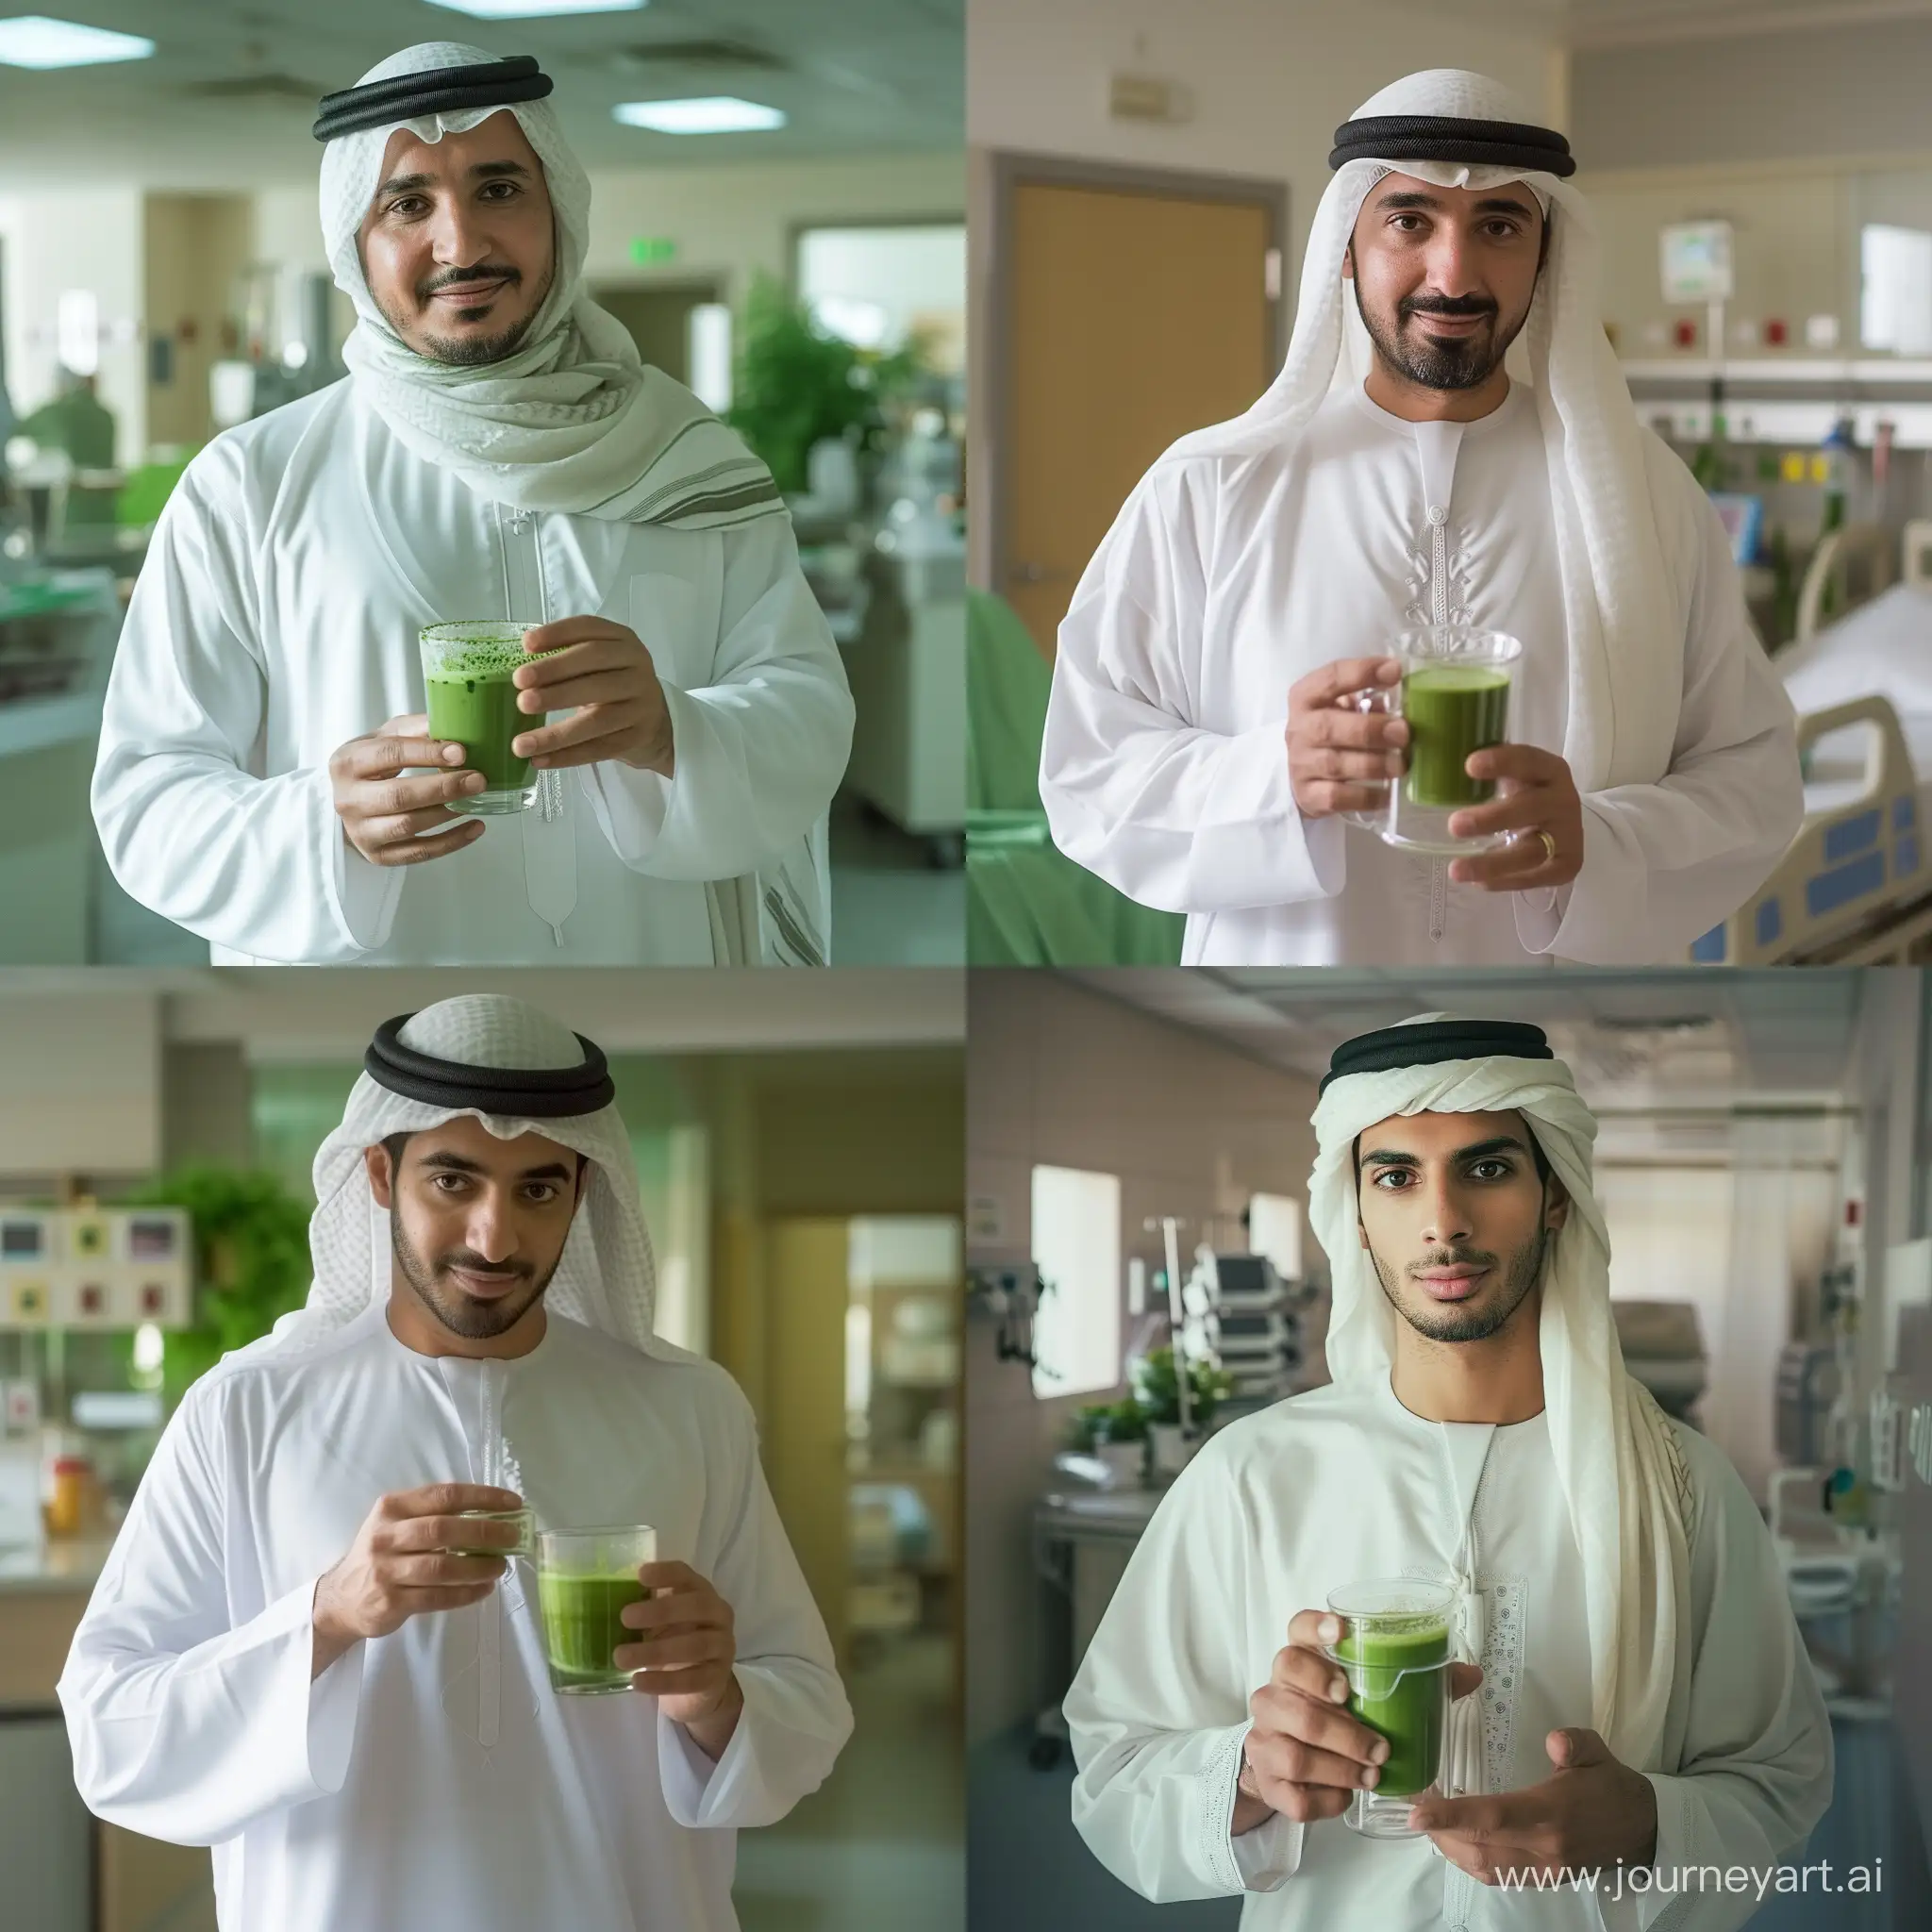 Real and natural photo of a man wearing a white Arabic dress and a white headscarf holding a glass of matcha tea. Matcha tea glass should be clear. The space around him is a hospital. Full details of matcha tea cup and man's face, clothes and hands. natural light.